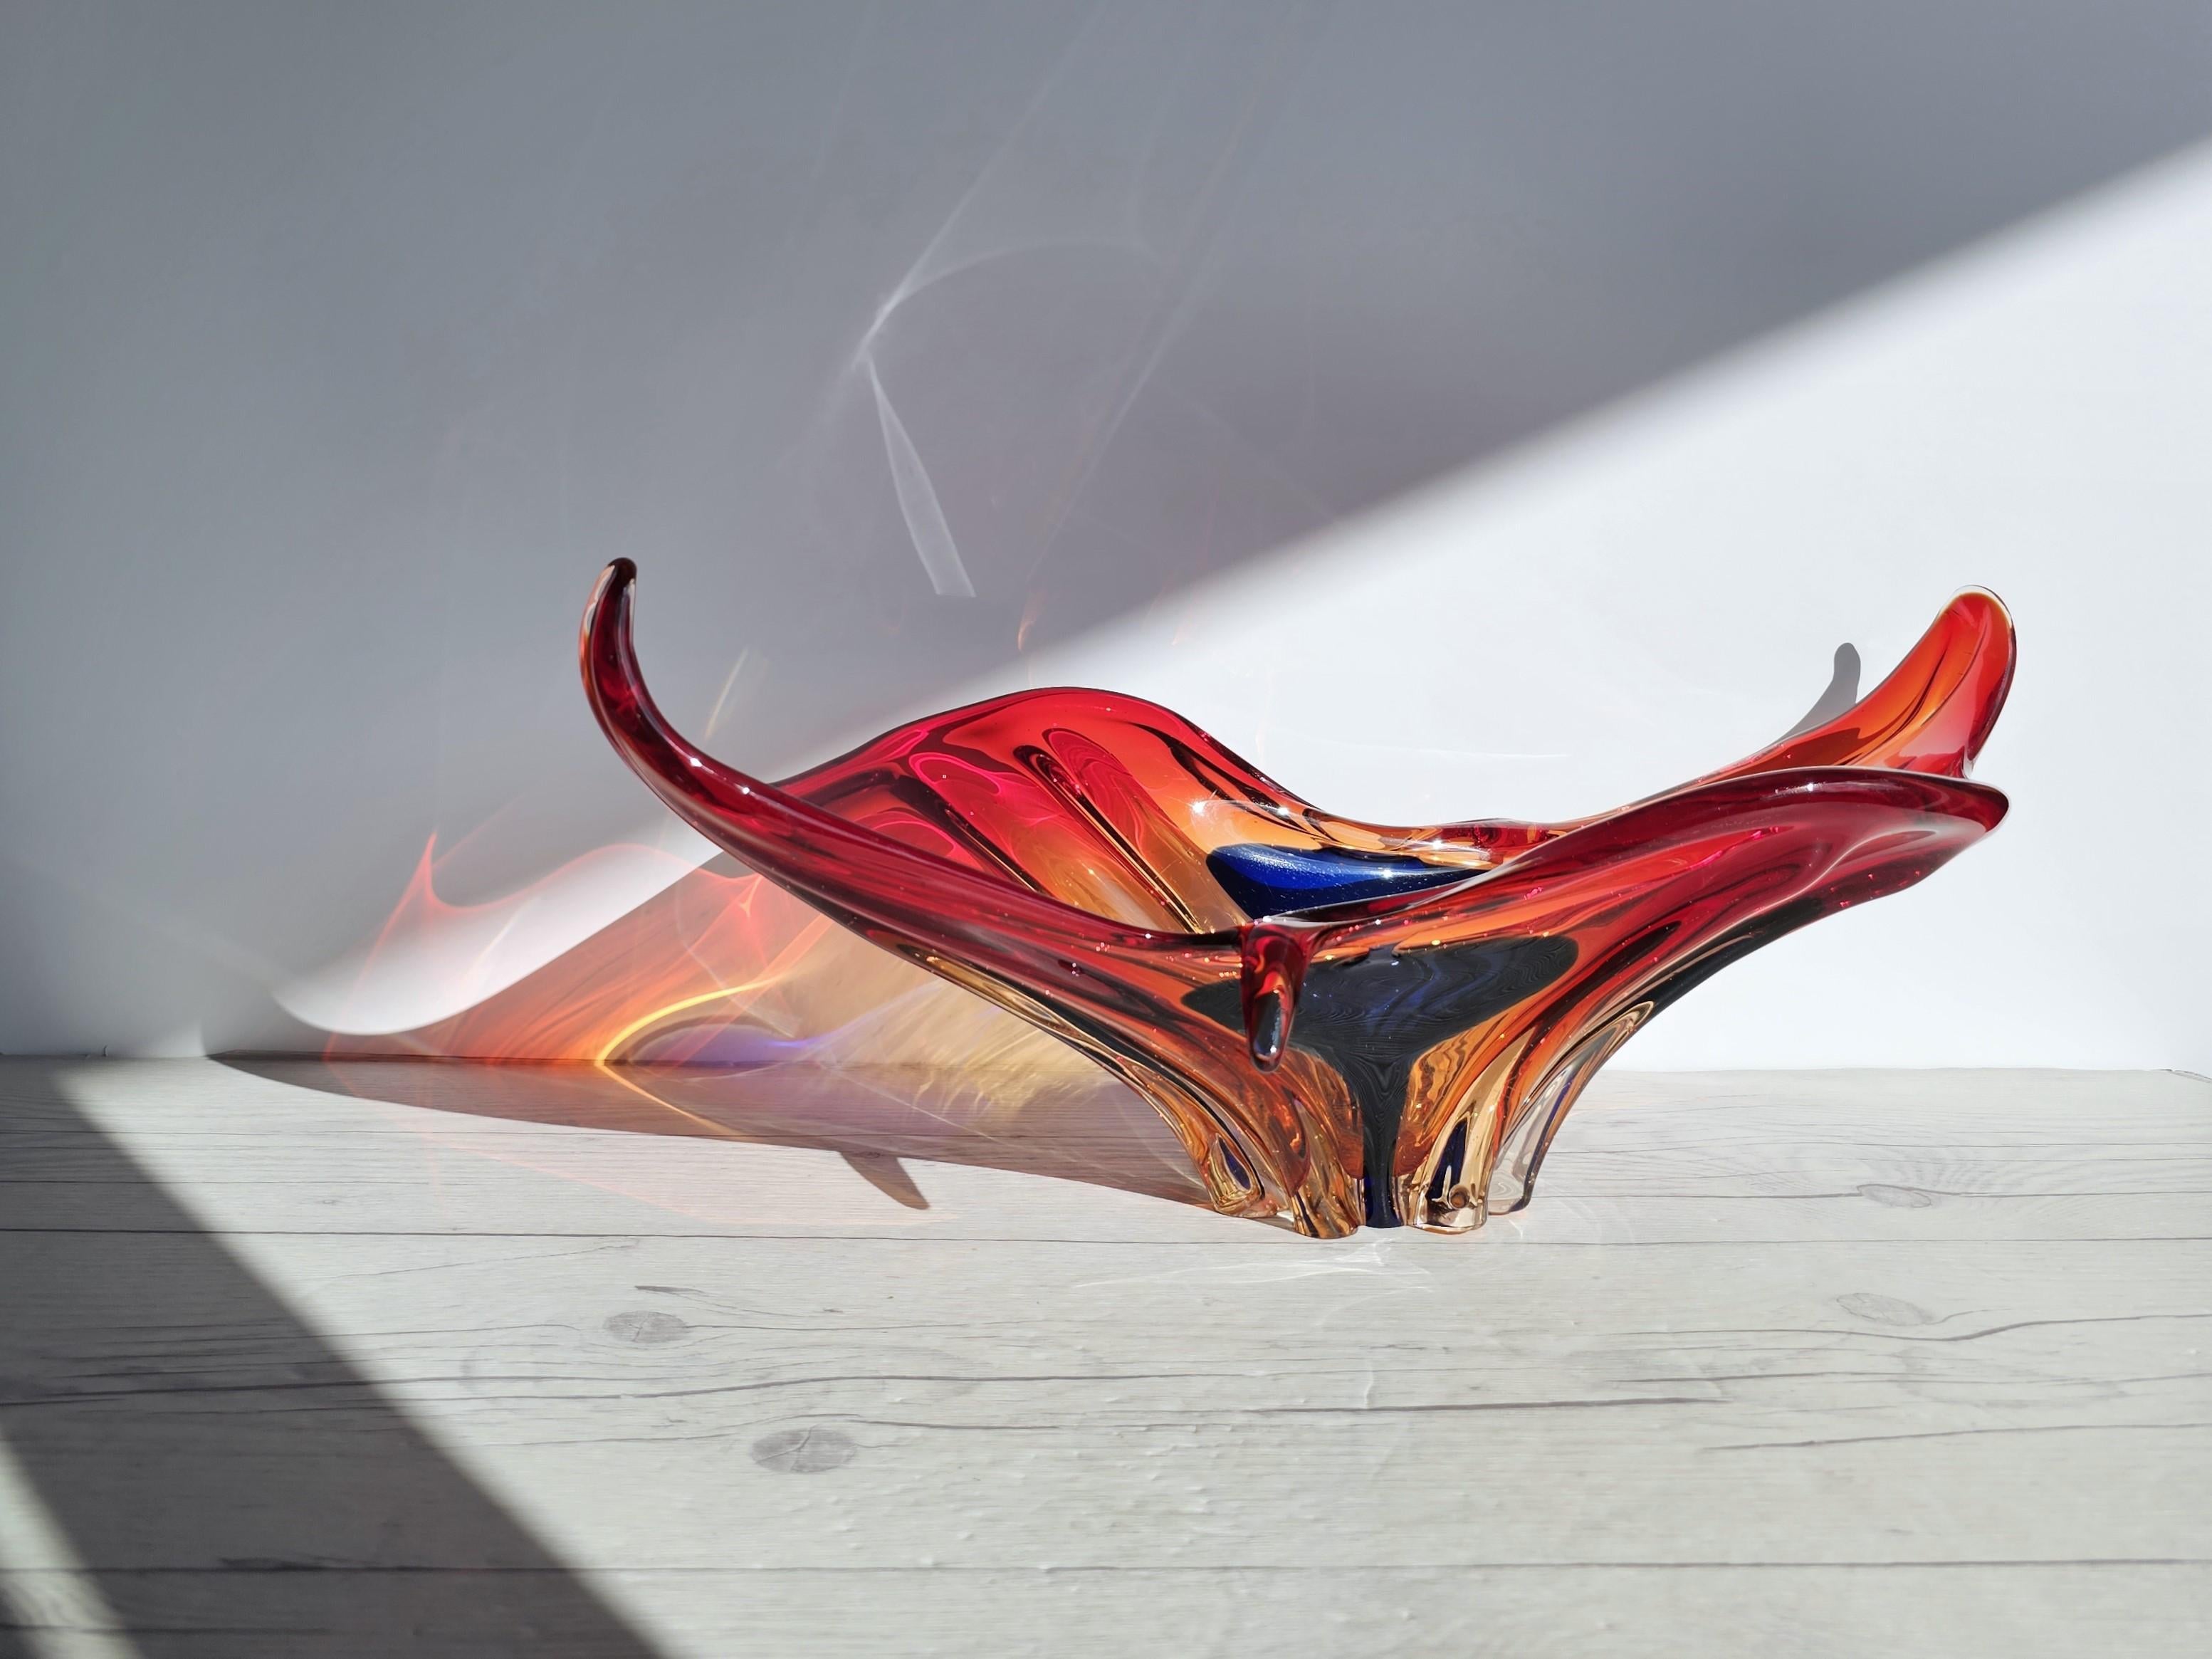 This striking and vivid work of handblown, Italian mid-century art glass design brings with it the beauty created by expert Murano art glass techniques. 

The form is that of a stylised, unfurling splash, expertly hot-worked into the elegantly